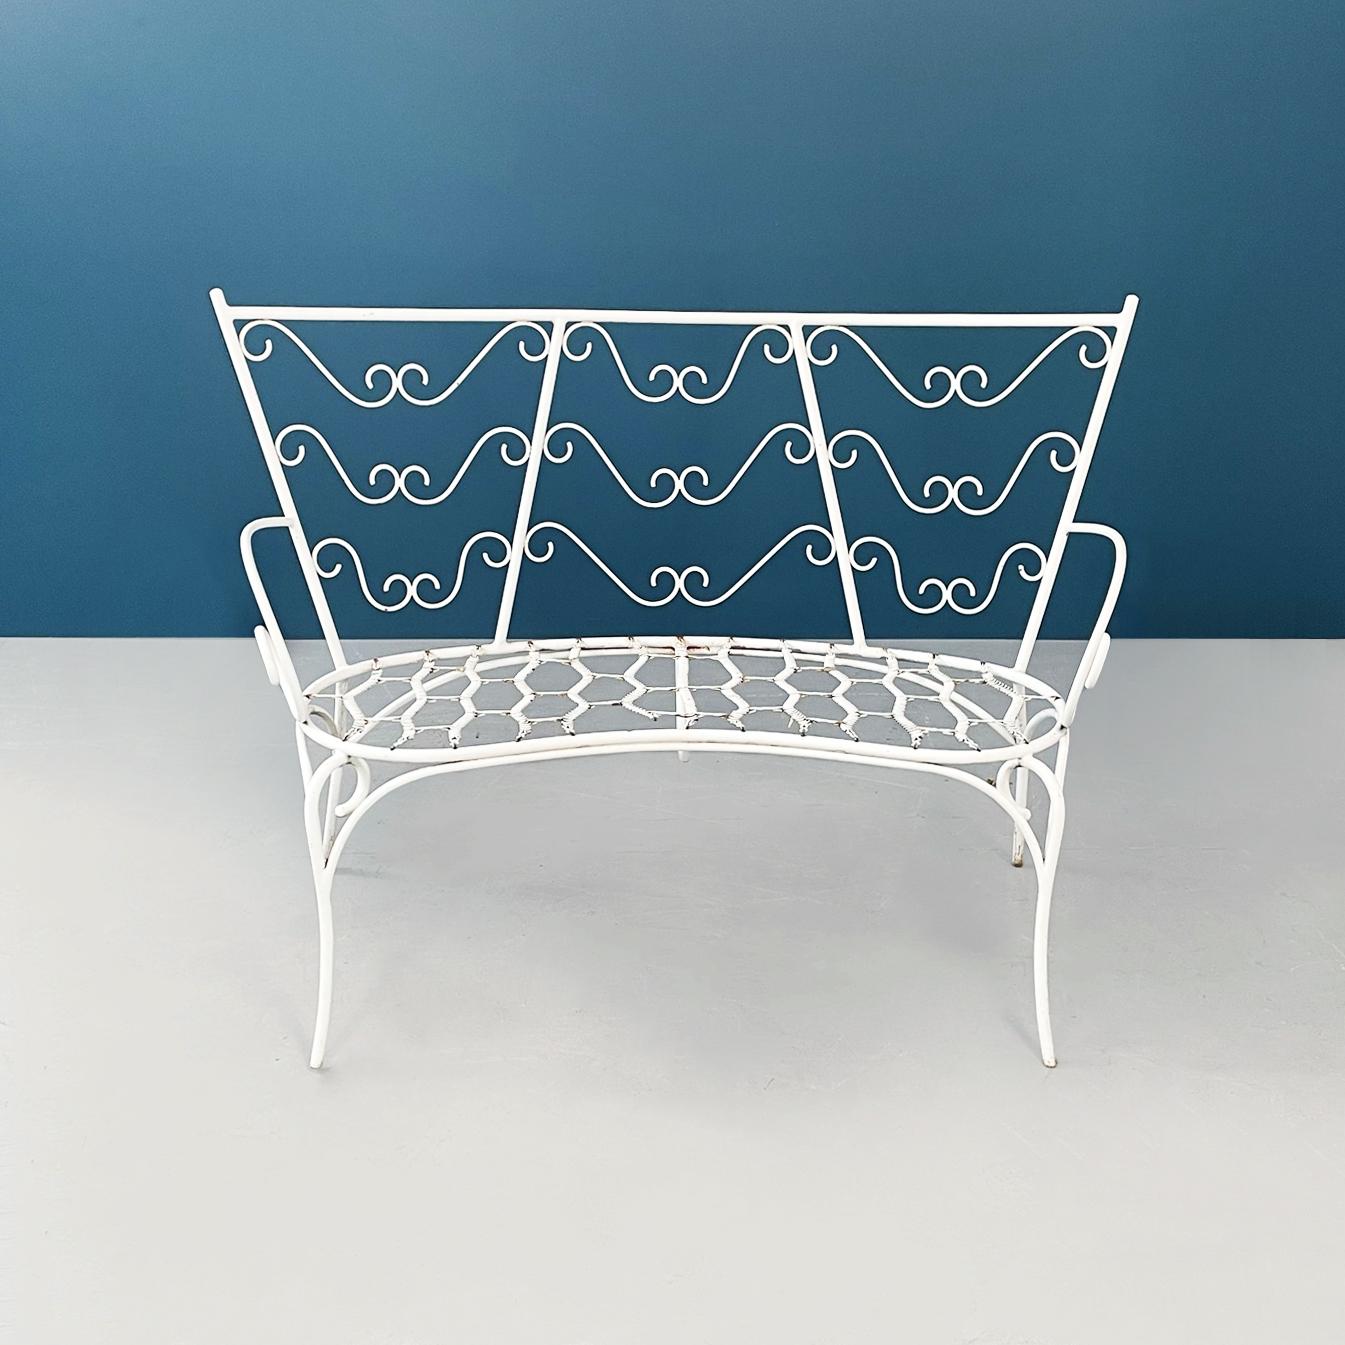 Italian Mid-Century Garden Bench in White Wrought Iron and Fabric, 1960s In Good Condition For Sale In MIlano, IT